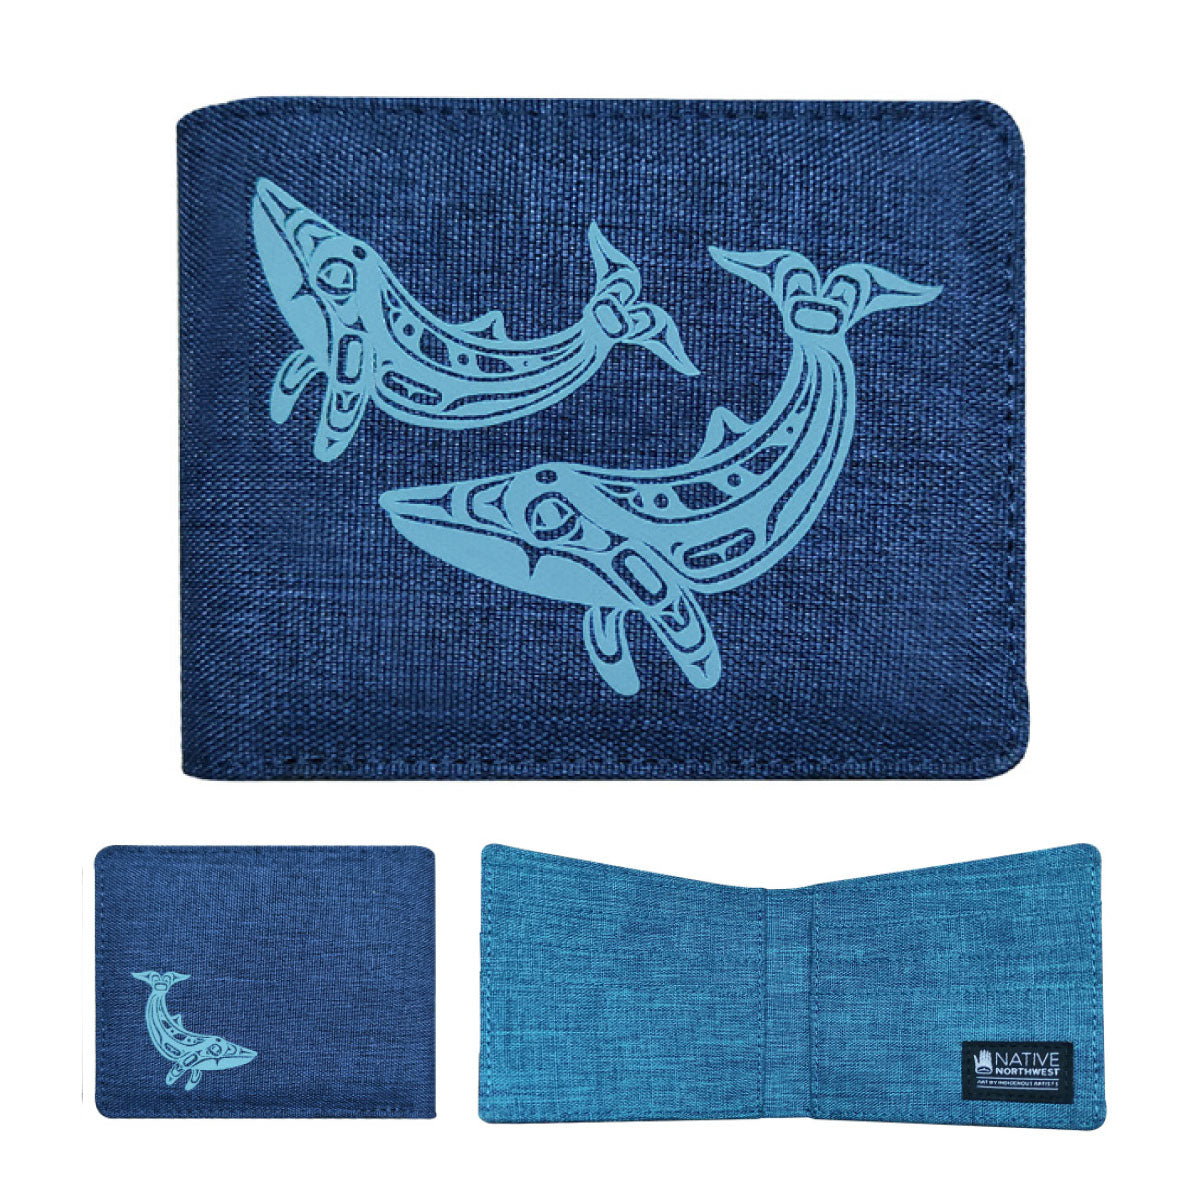 Wallet Humpback Whale Turq - Wallet Humpback Whale Turq -  - House of Himwitsa Native Art Gallery and Gifts